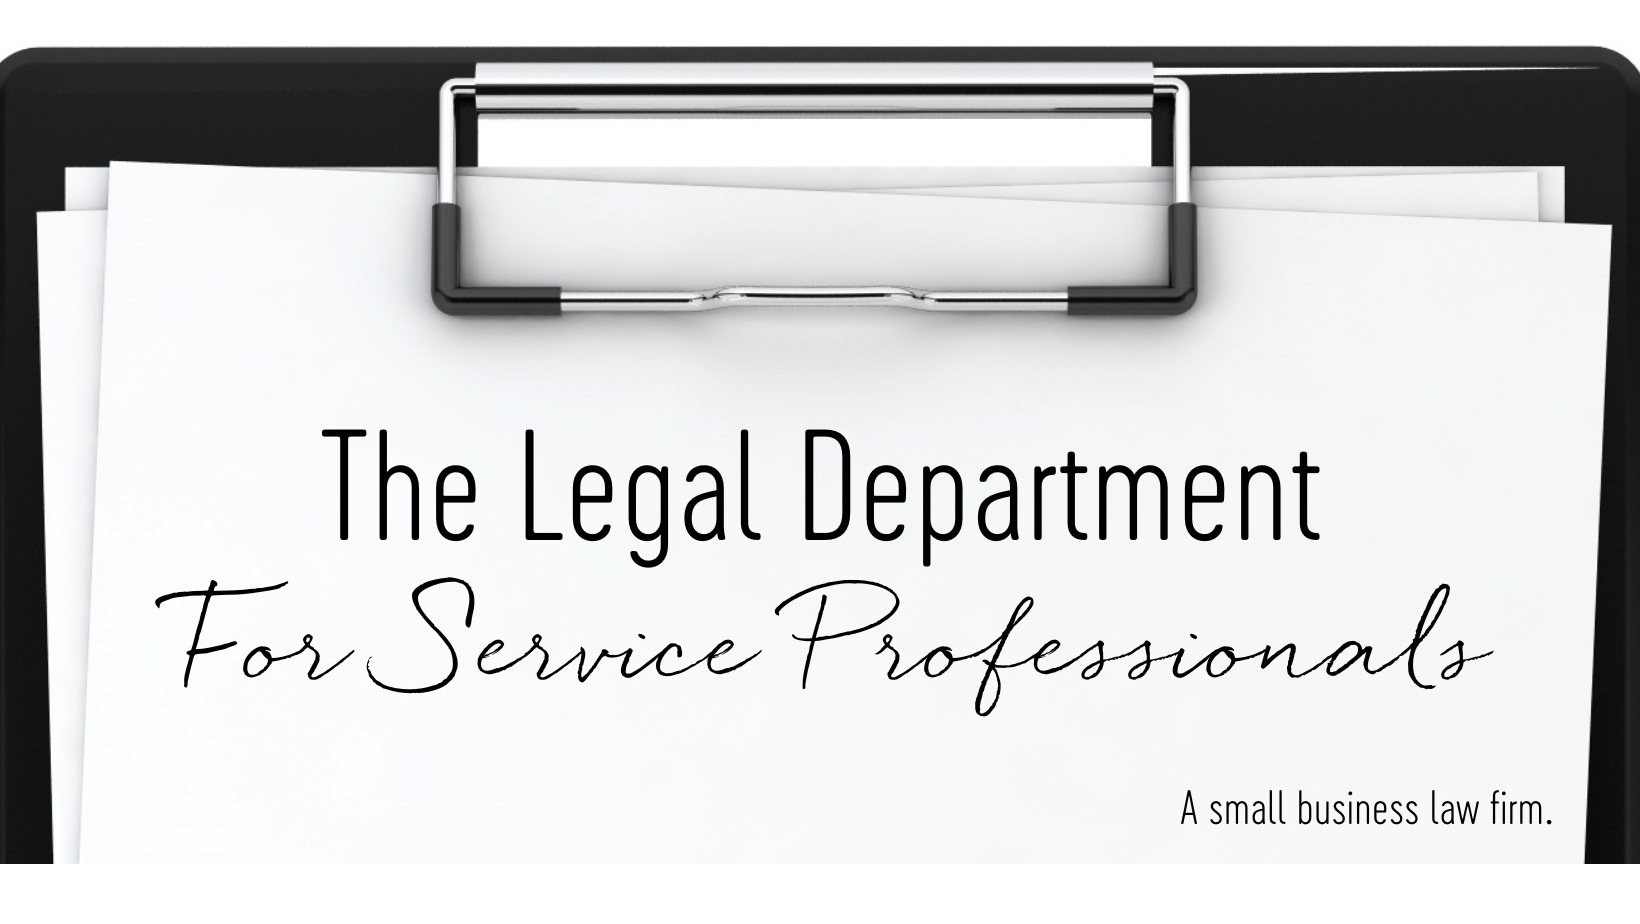 The Legal Department for Service Professionals